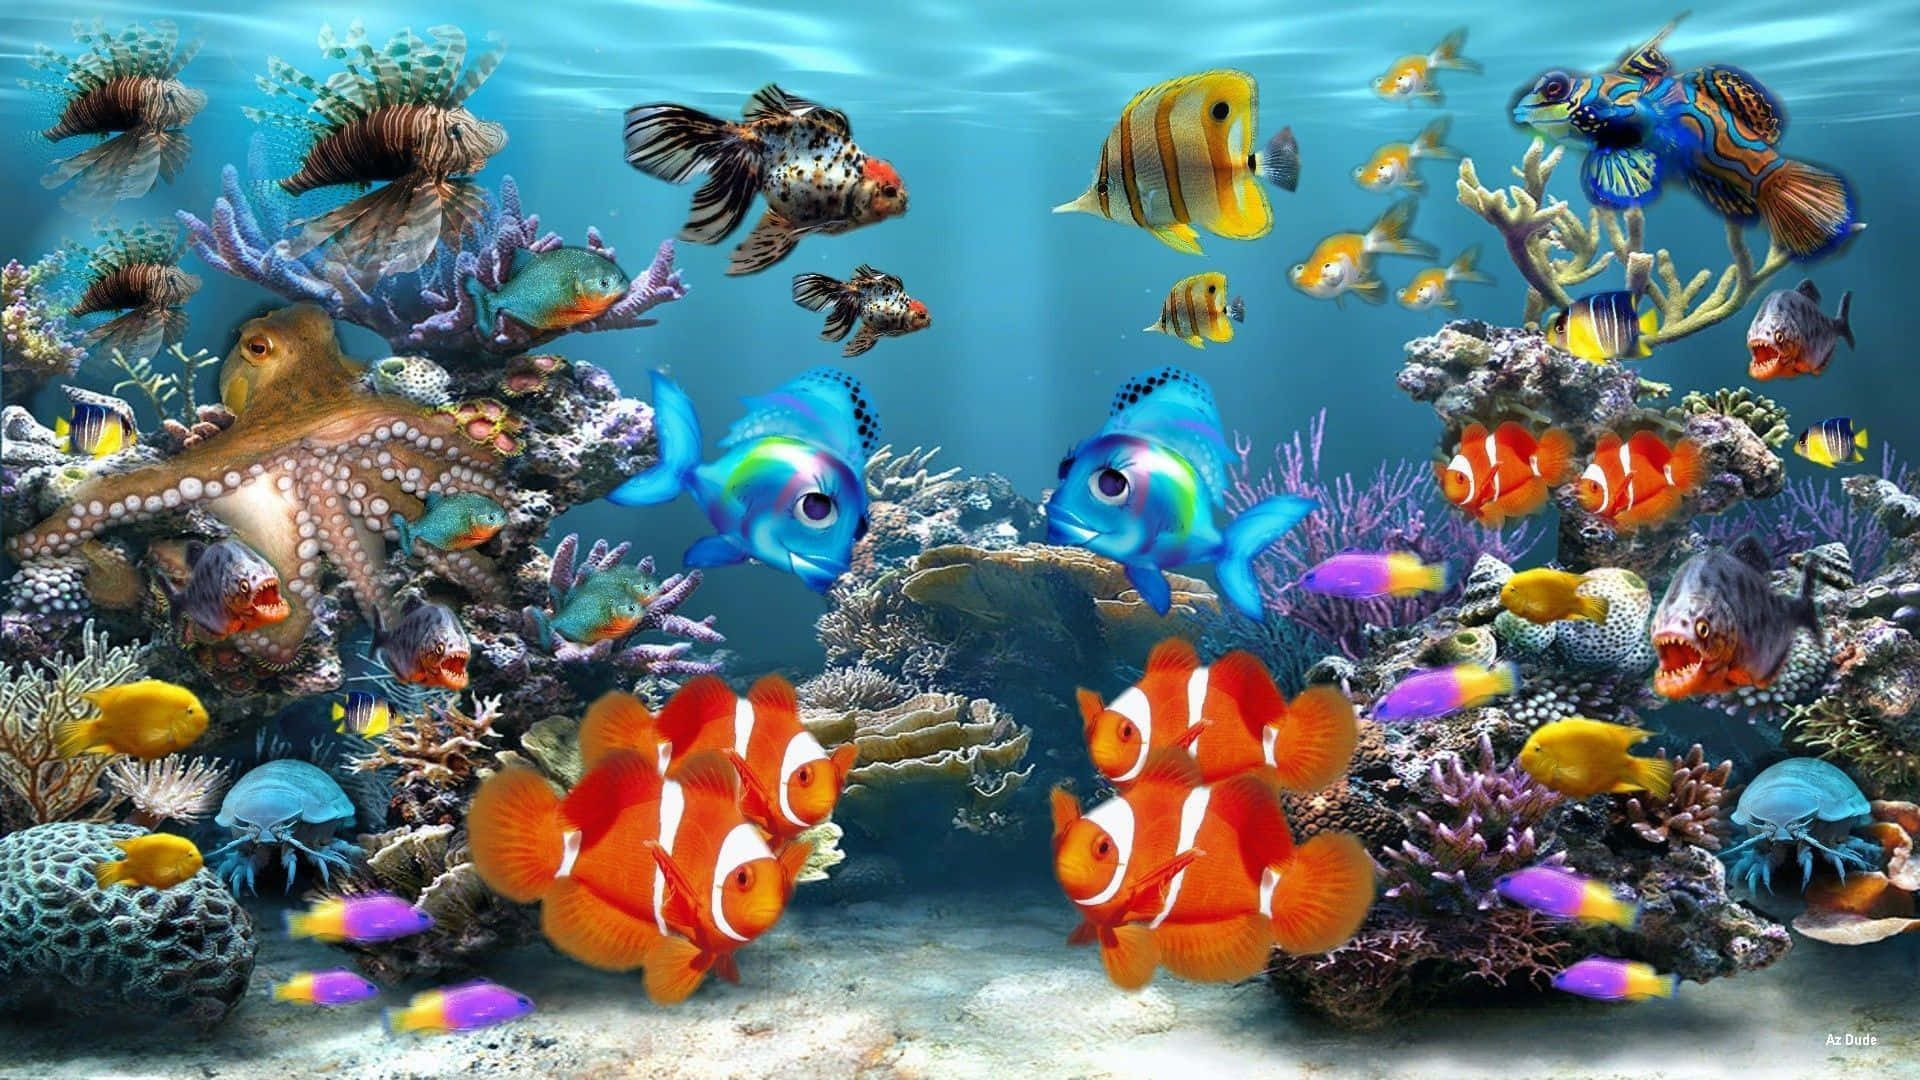 A Colorful Underwater Scene With Many Fish Wallpaper